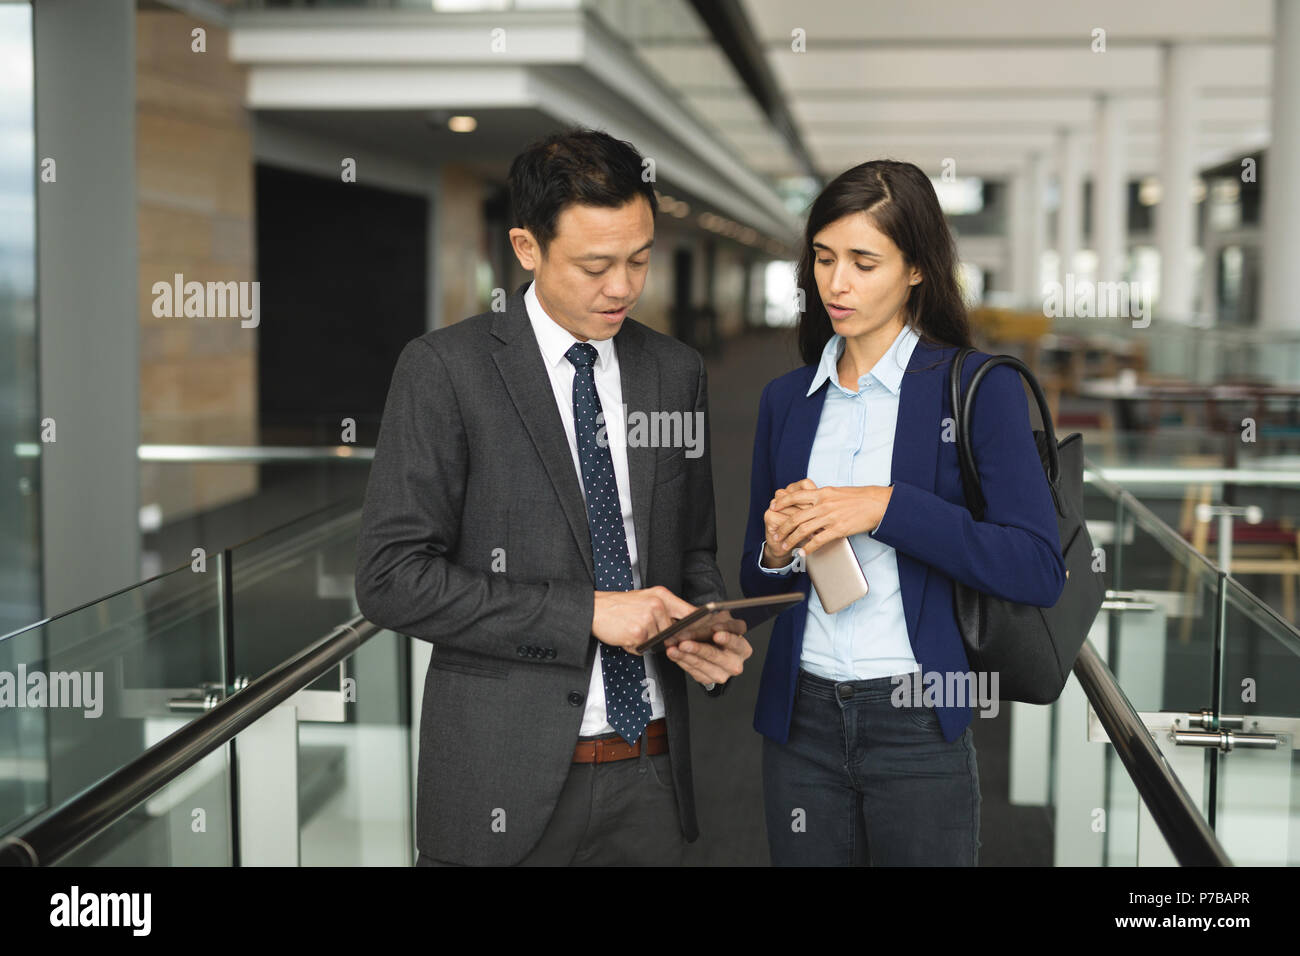 Businessman and businesswoman discussing over a digital tablet Stock Photo